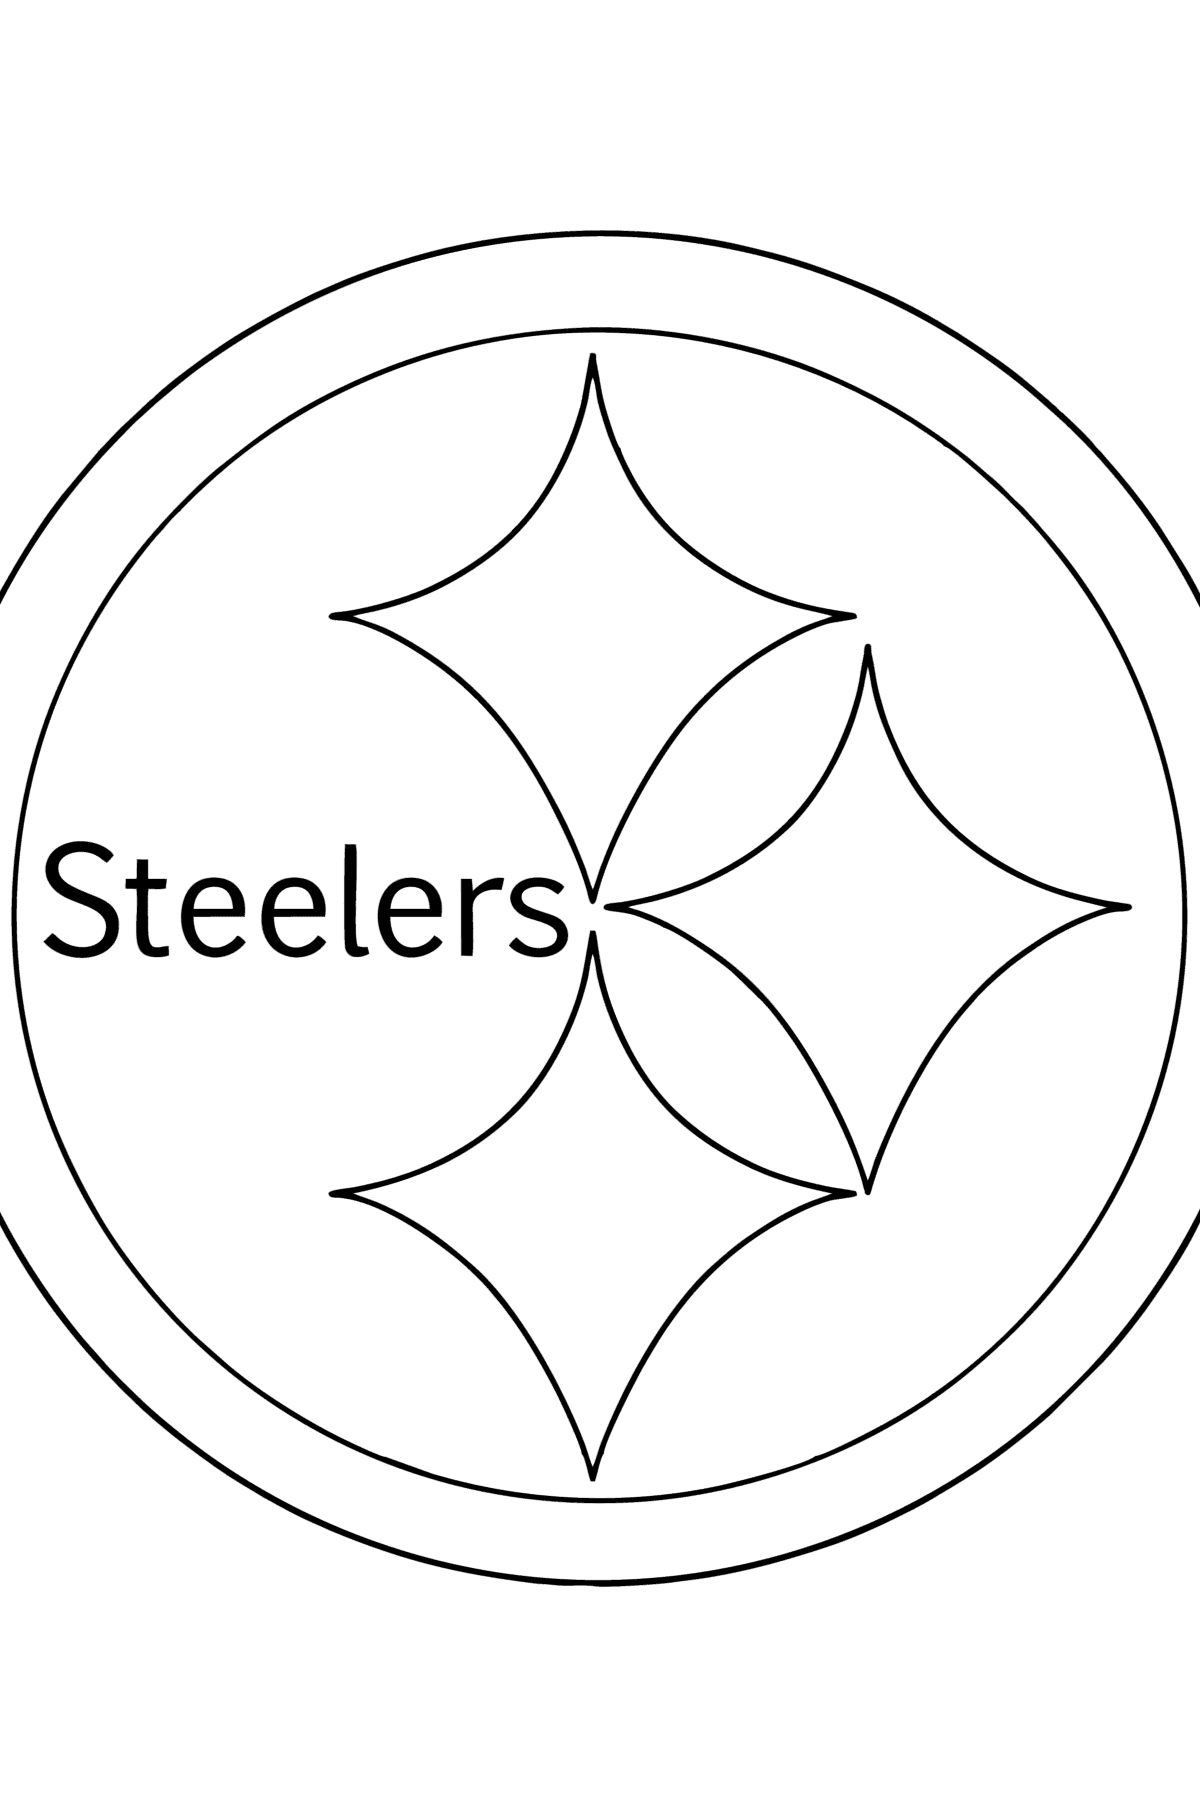 NFL Pittsburgh Steelers сoloring page - Coloring Pages for Kids